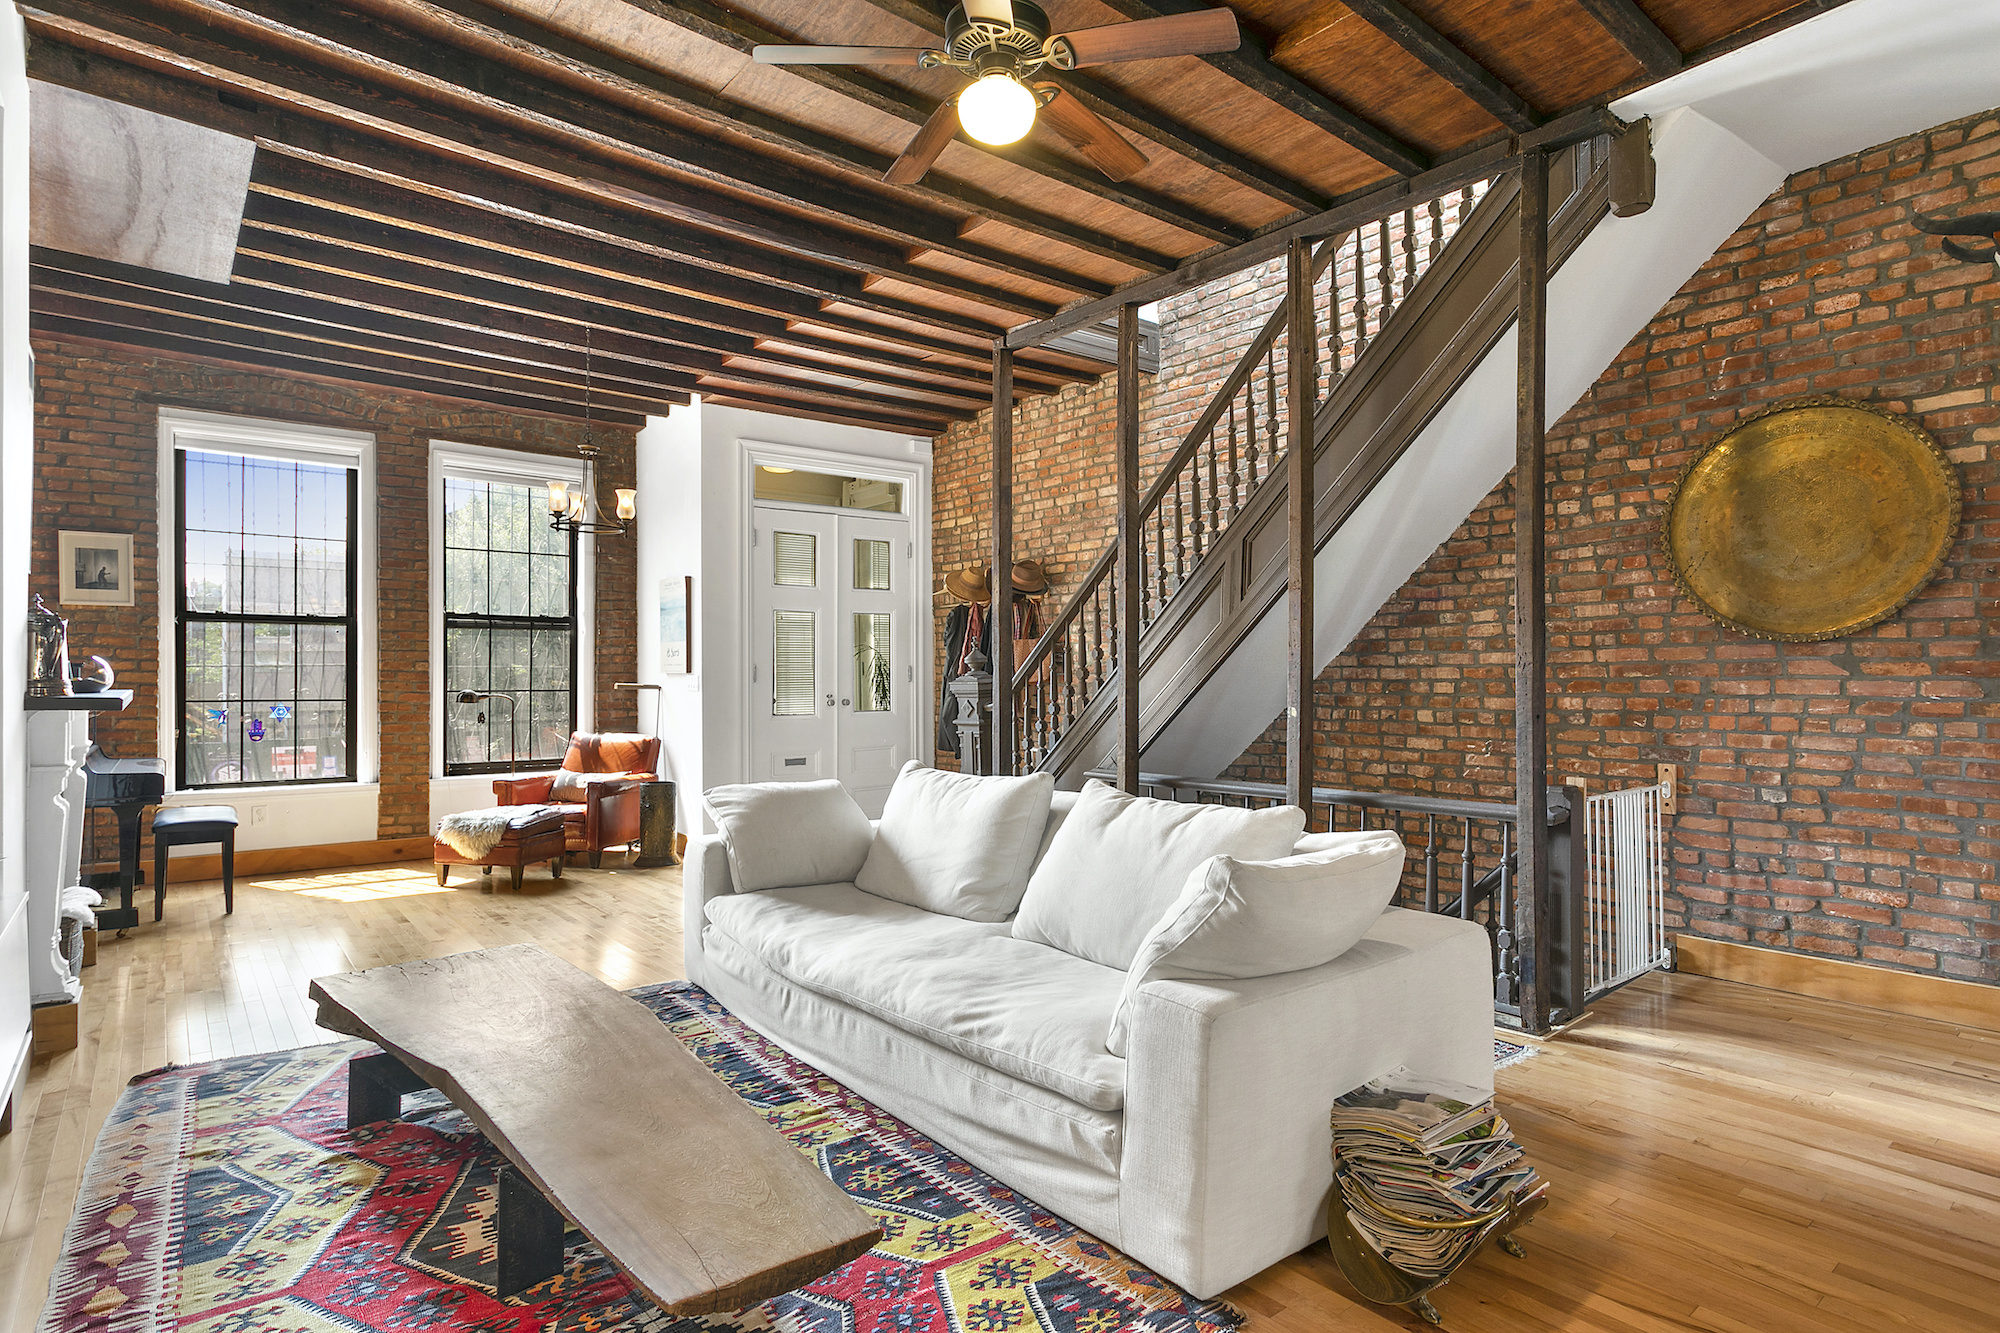 $1.65M Bed-Stuy townhouse has two apartments and lots of character